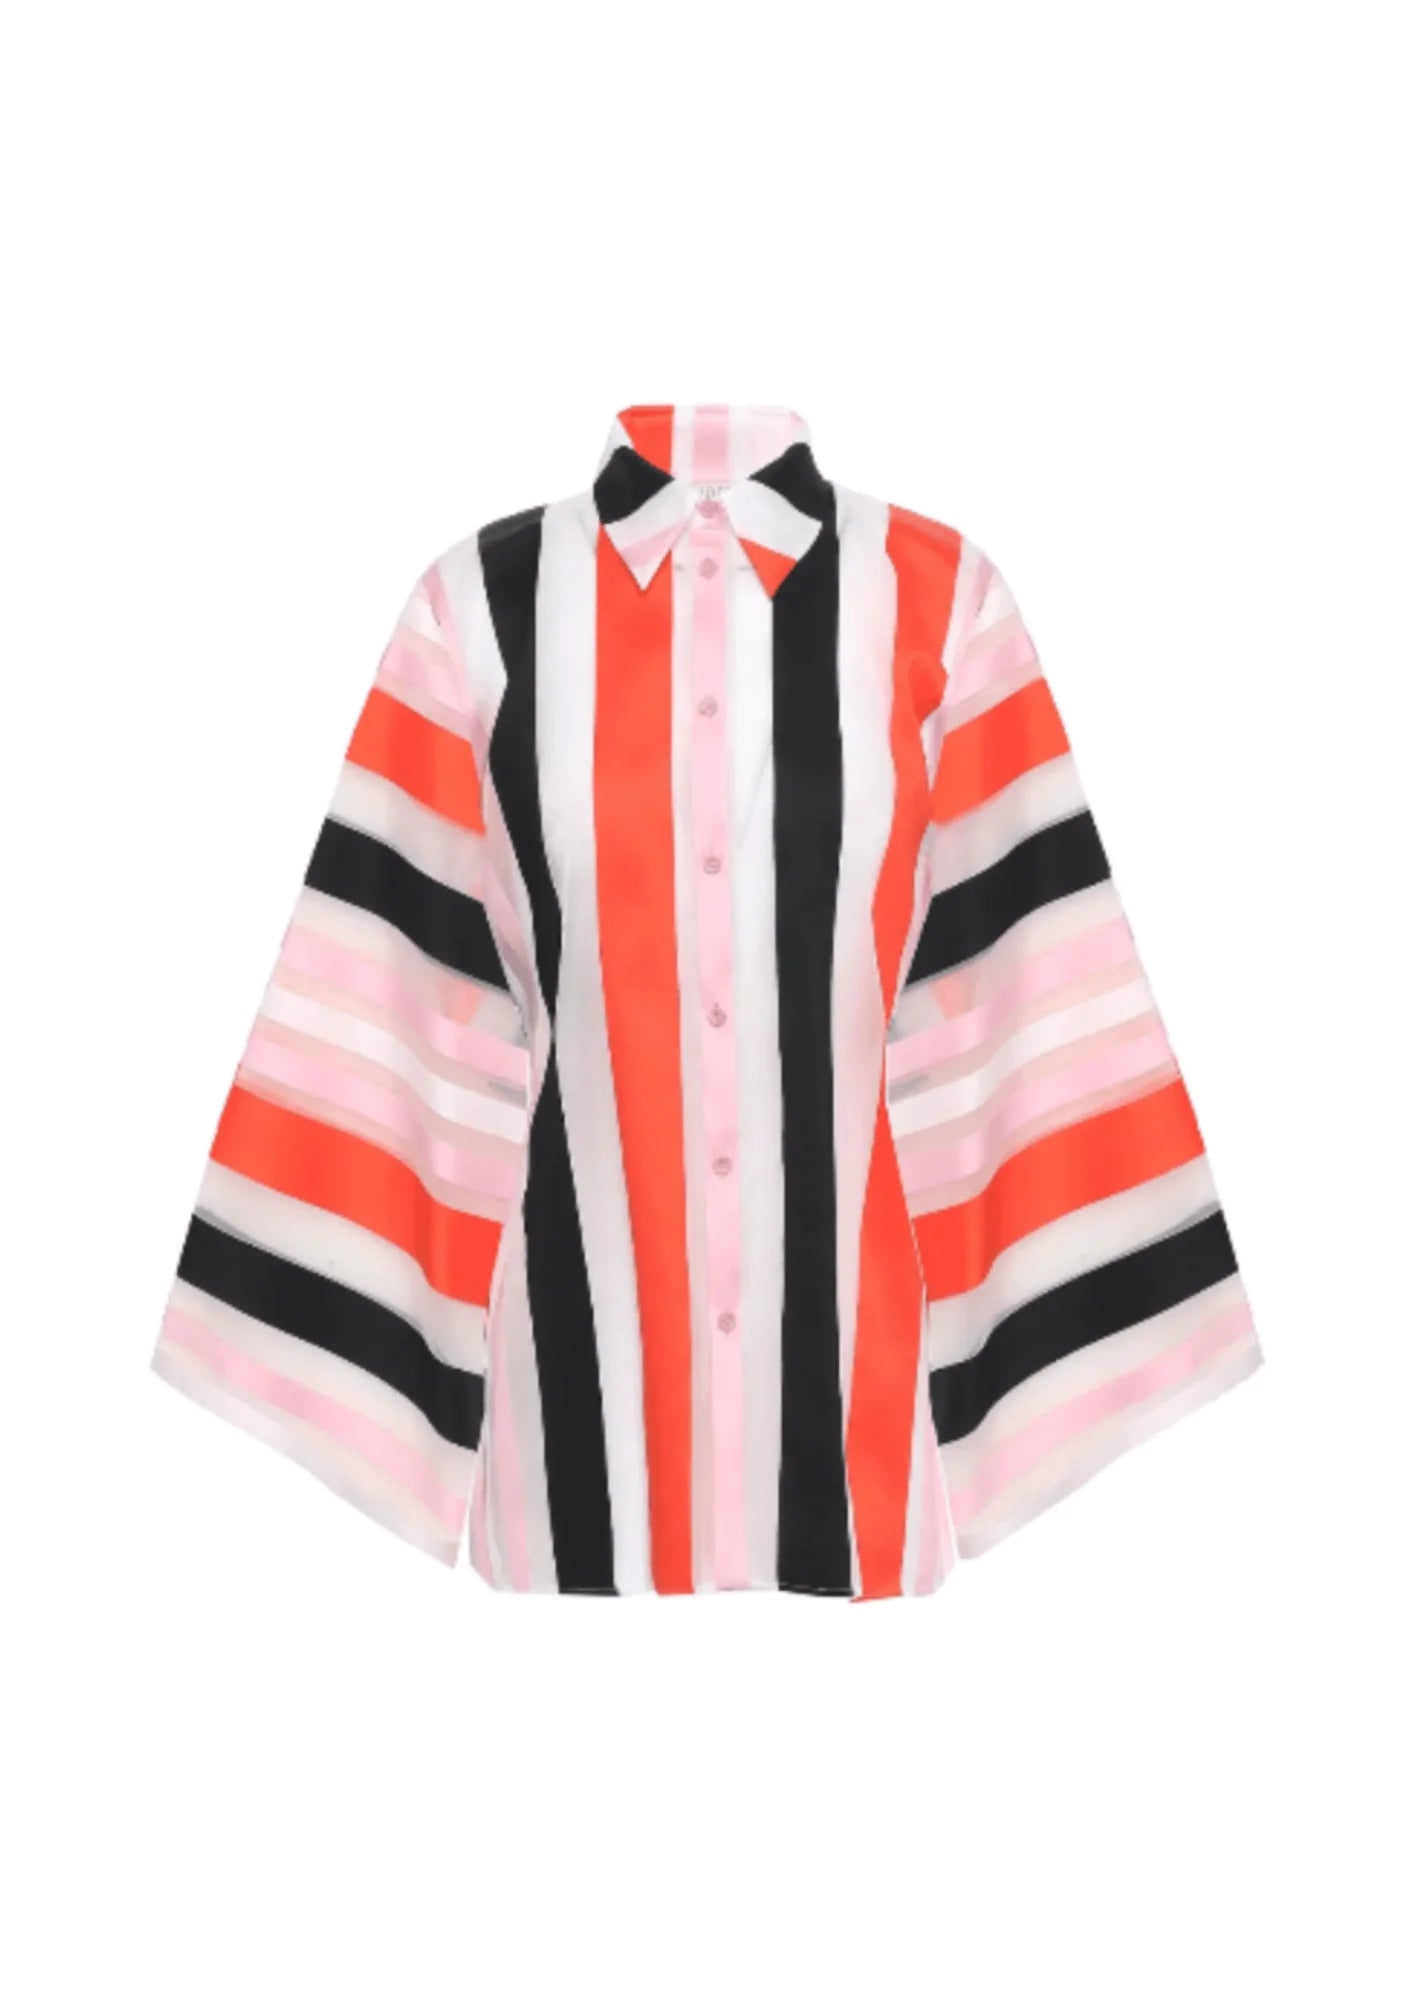 MULTICOLORED OVERSIZED STRIPED SHIRT